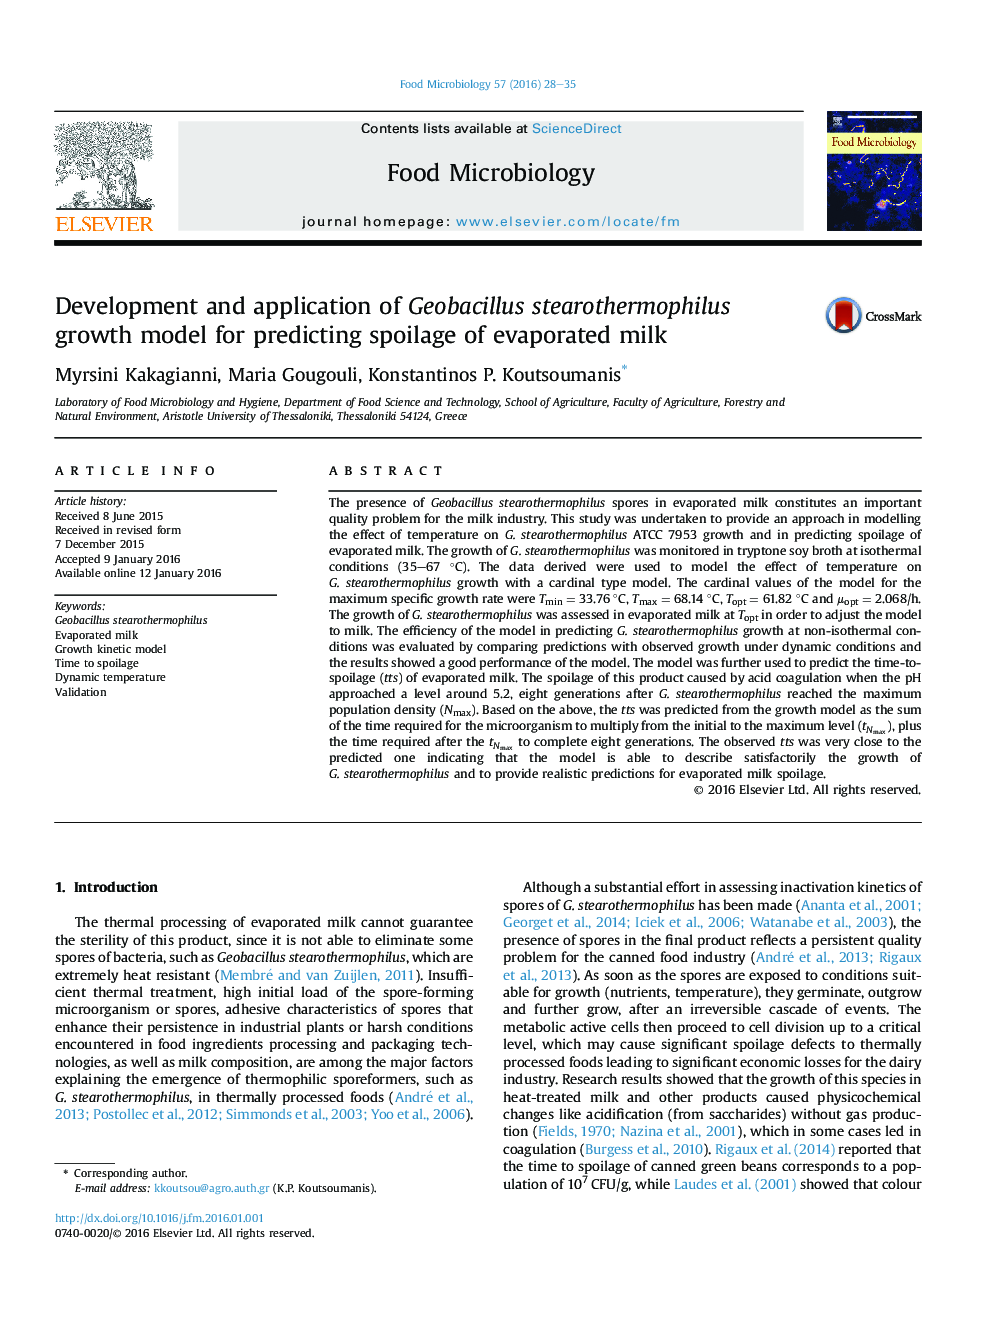 Development and application of Geobacillus stearothermophilus growth model for predicting spoilage of evaporated milk